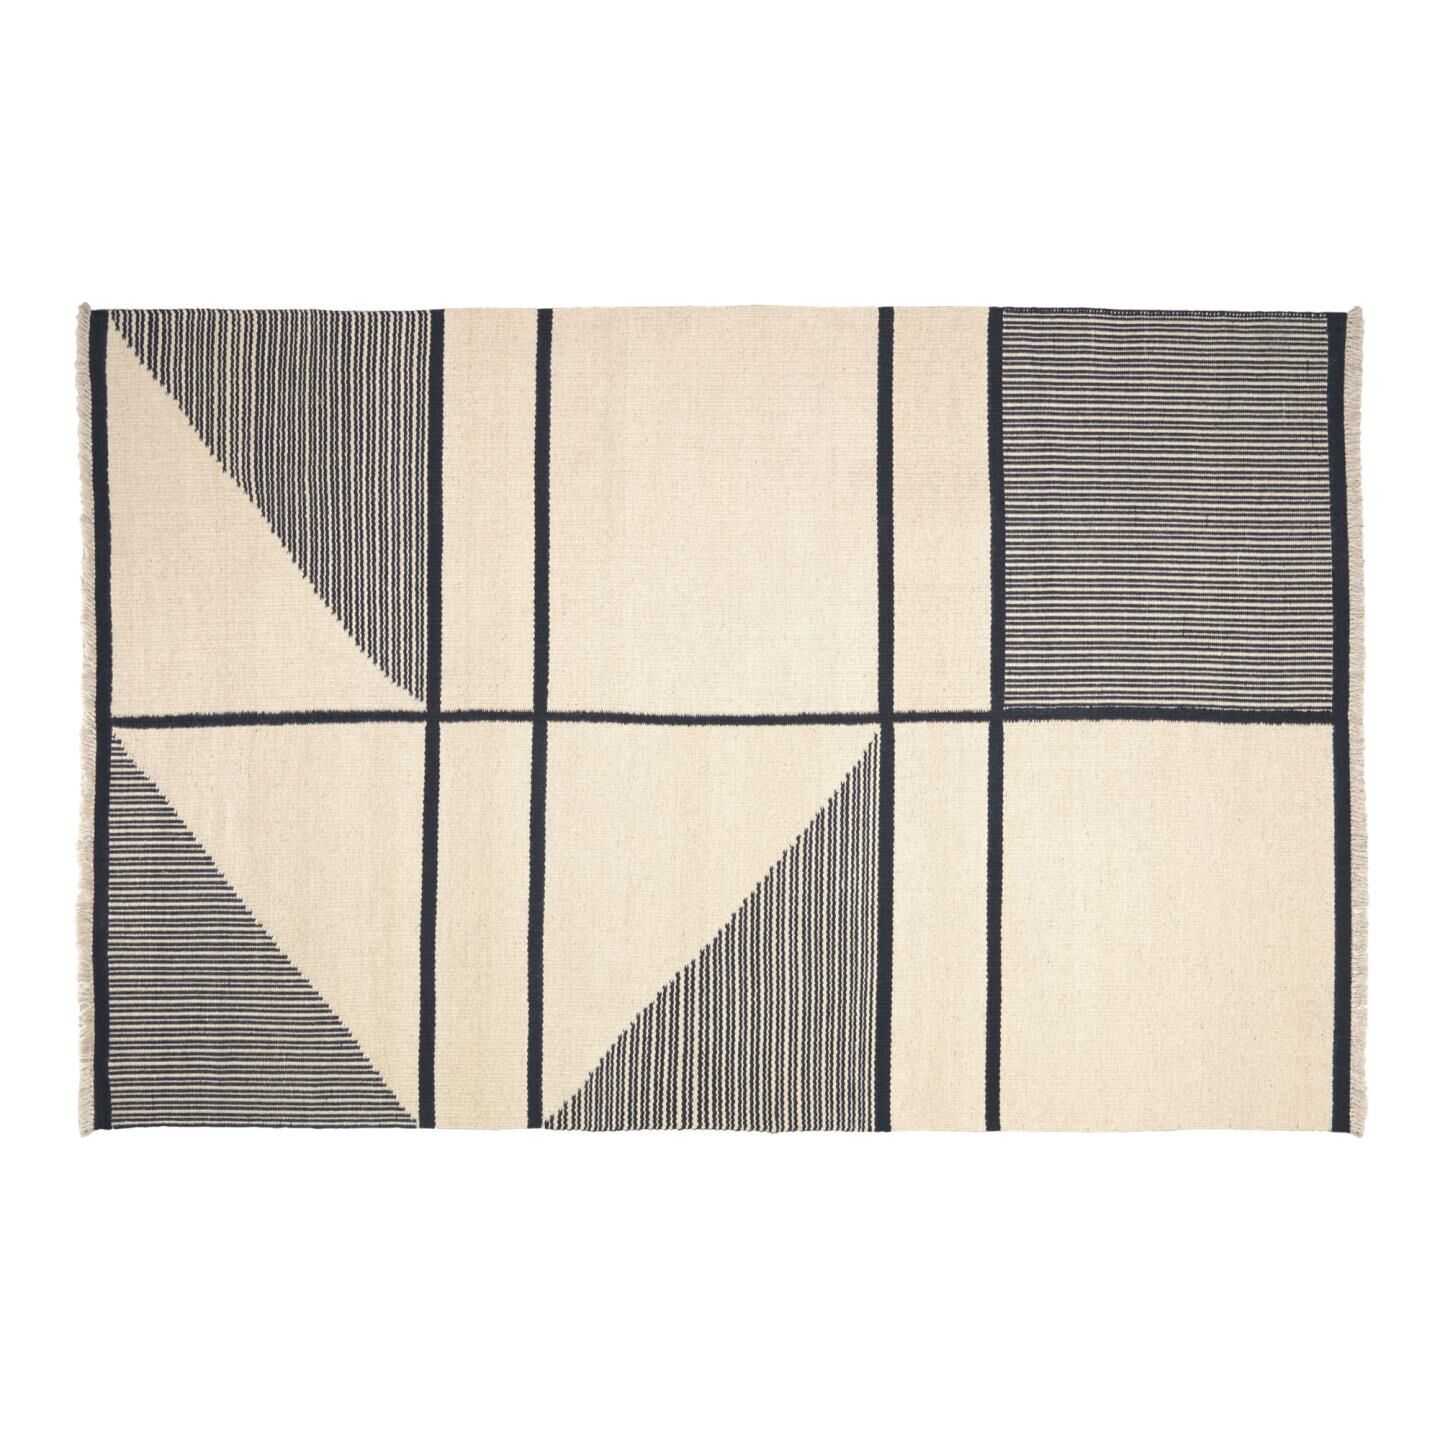 Kave Home Bernardine wool and cotton rug in black and white 160 x 230 cm